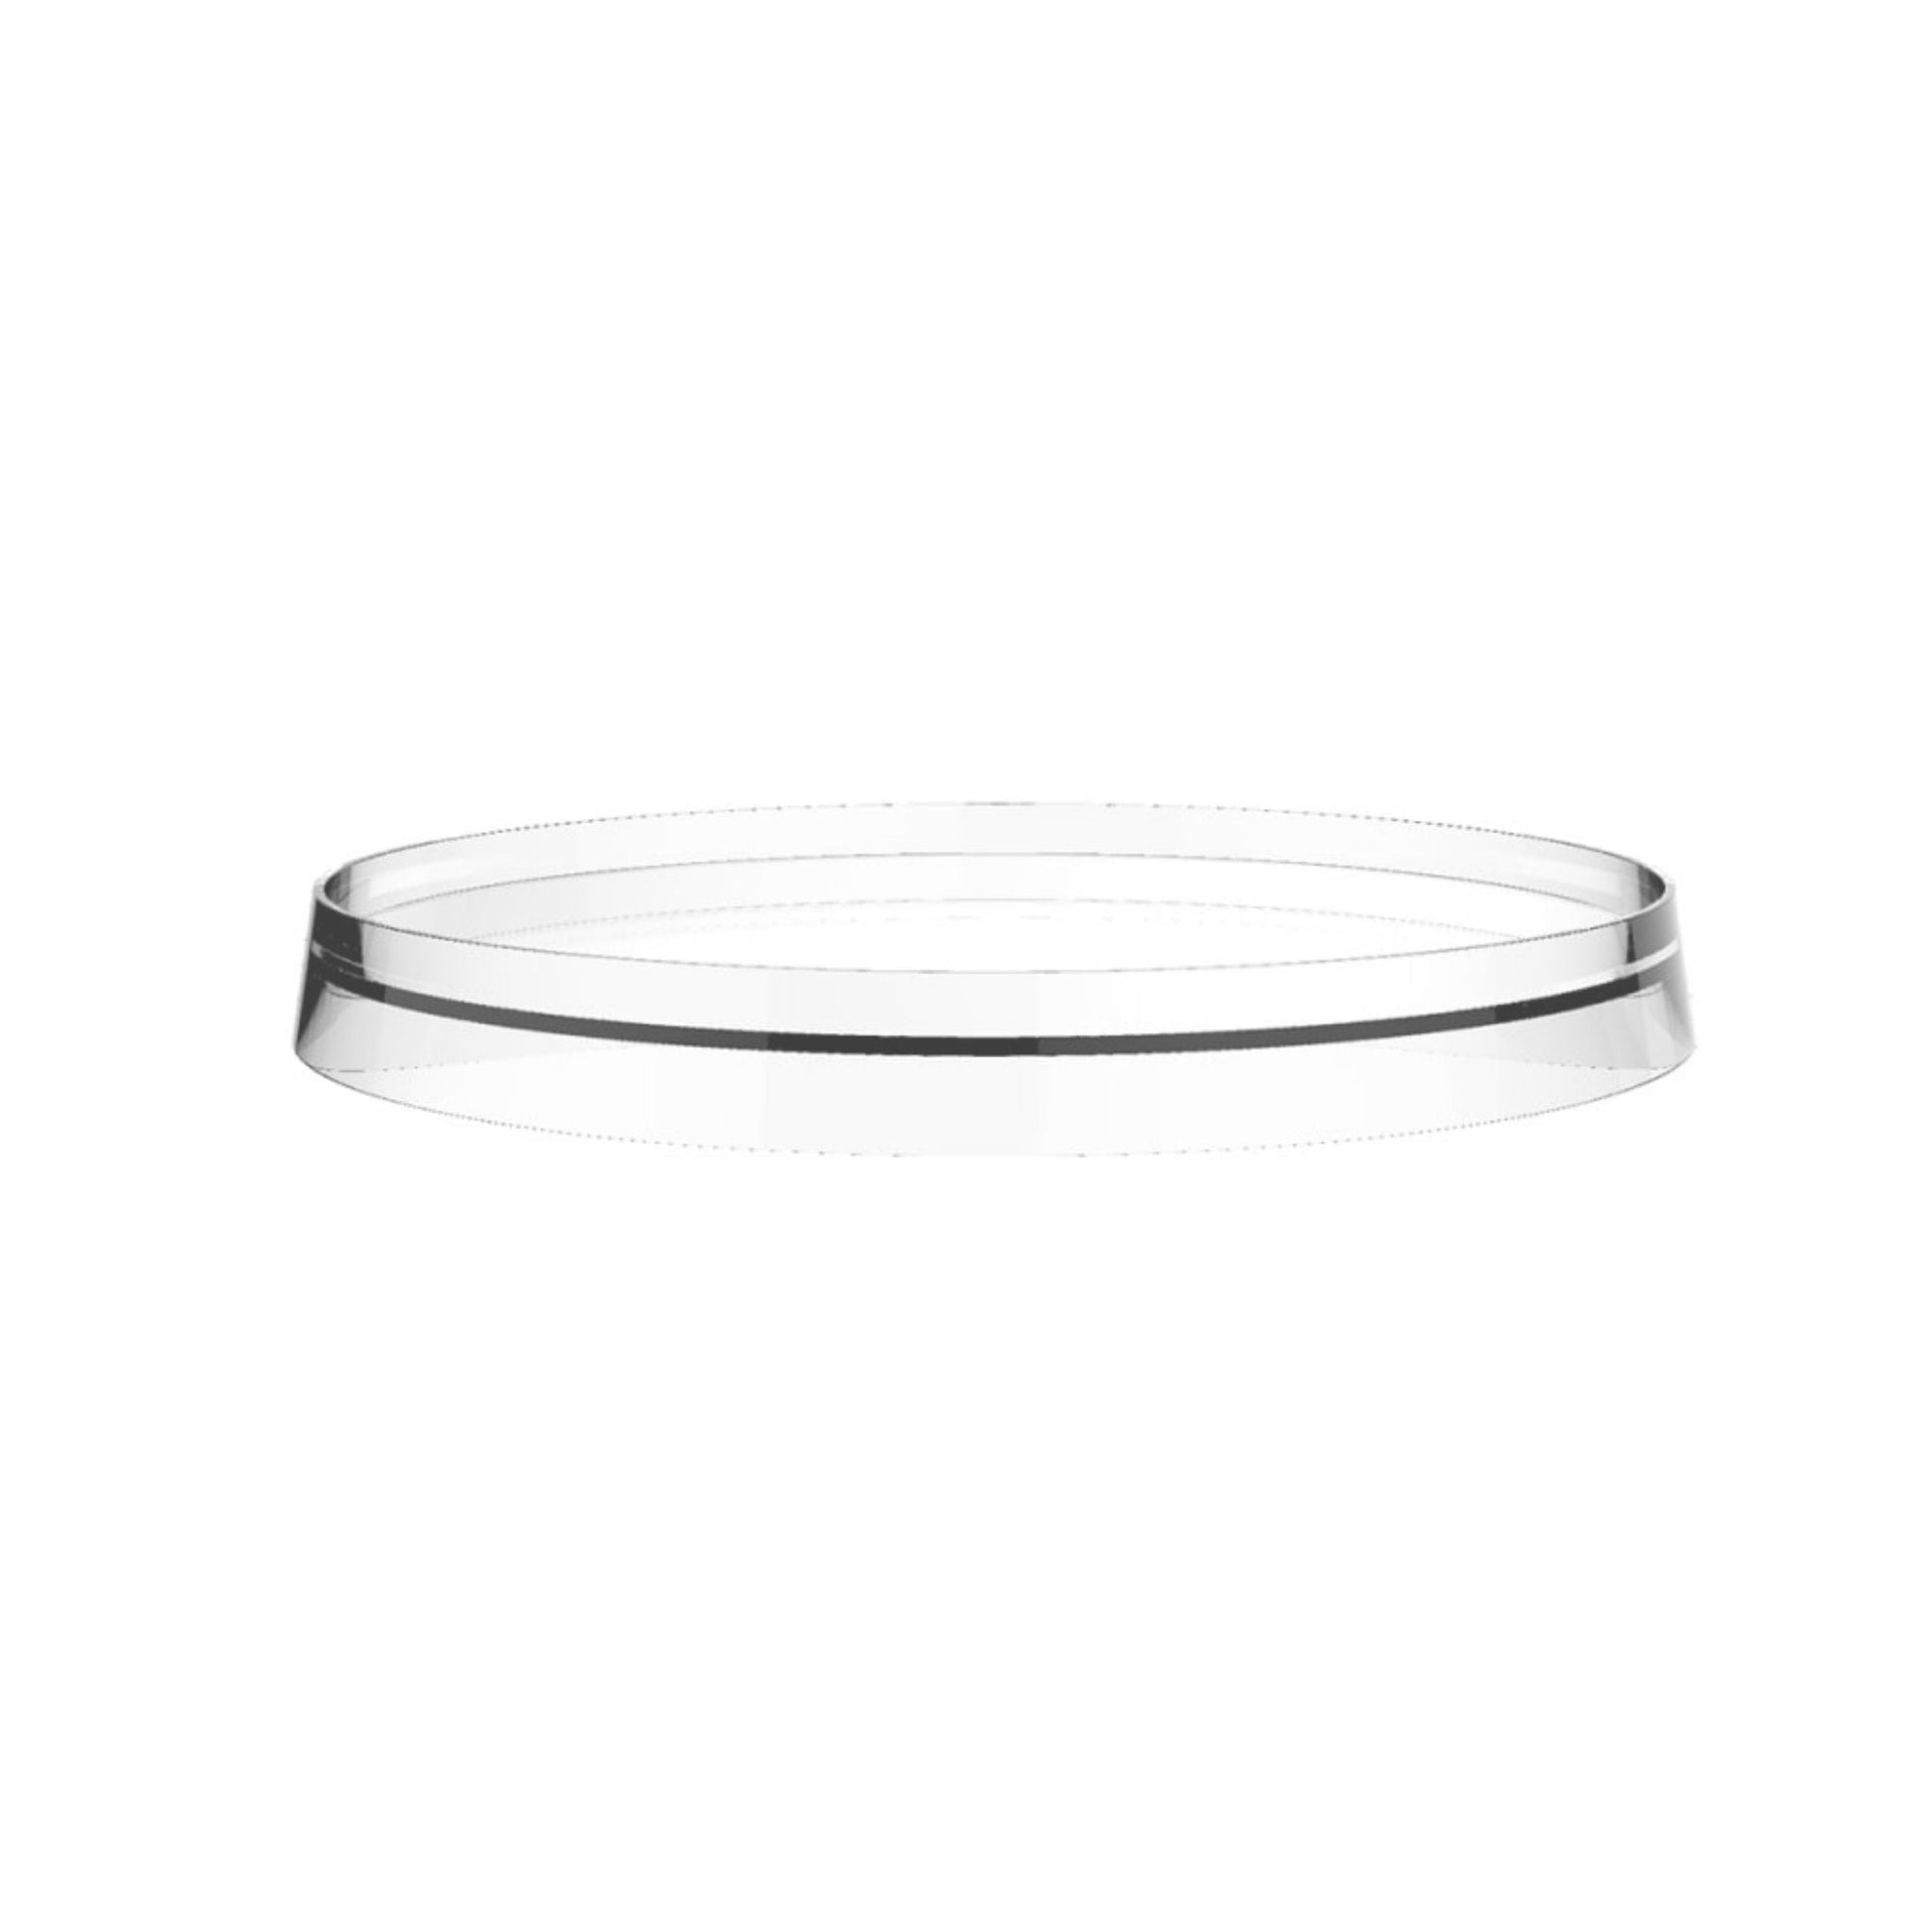 Laufen Kartell 11" Crystal Disc Tray for Bathtub Faucet Model H321331